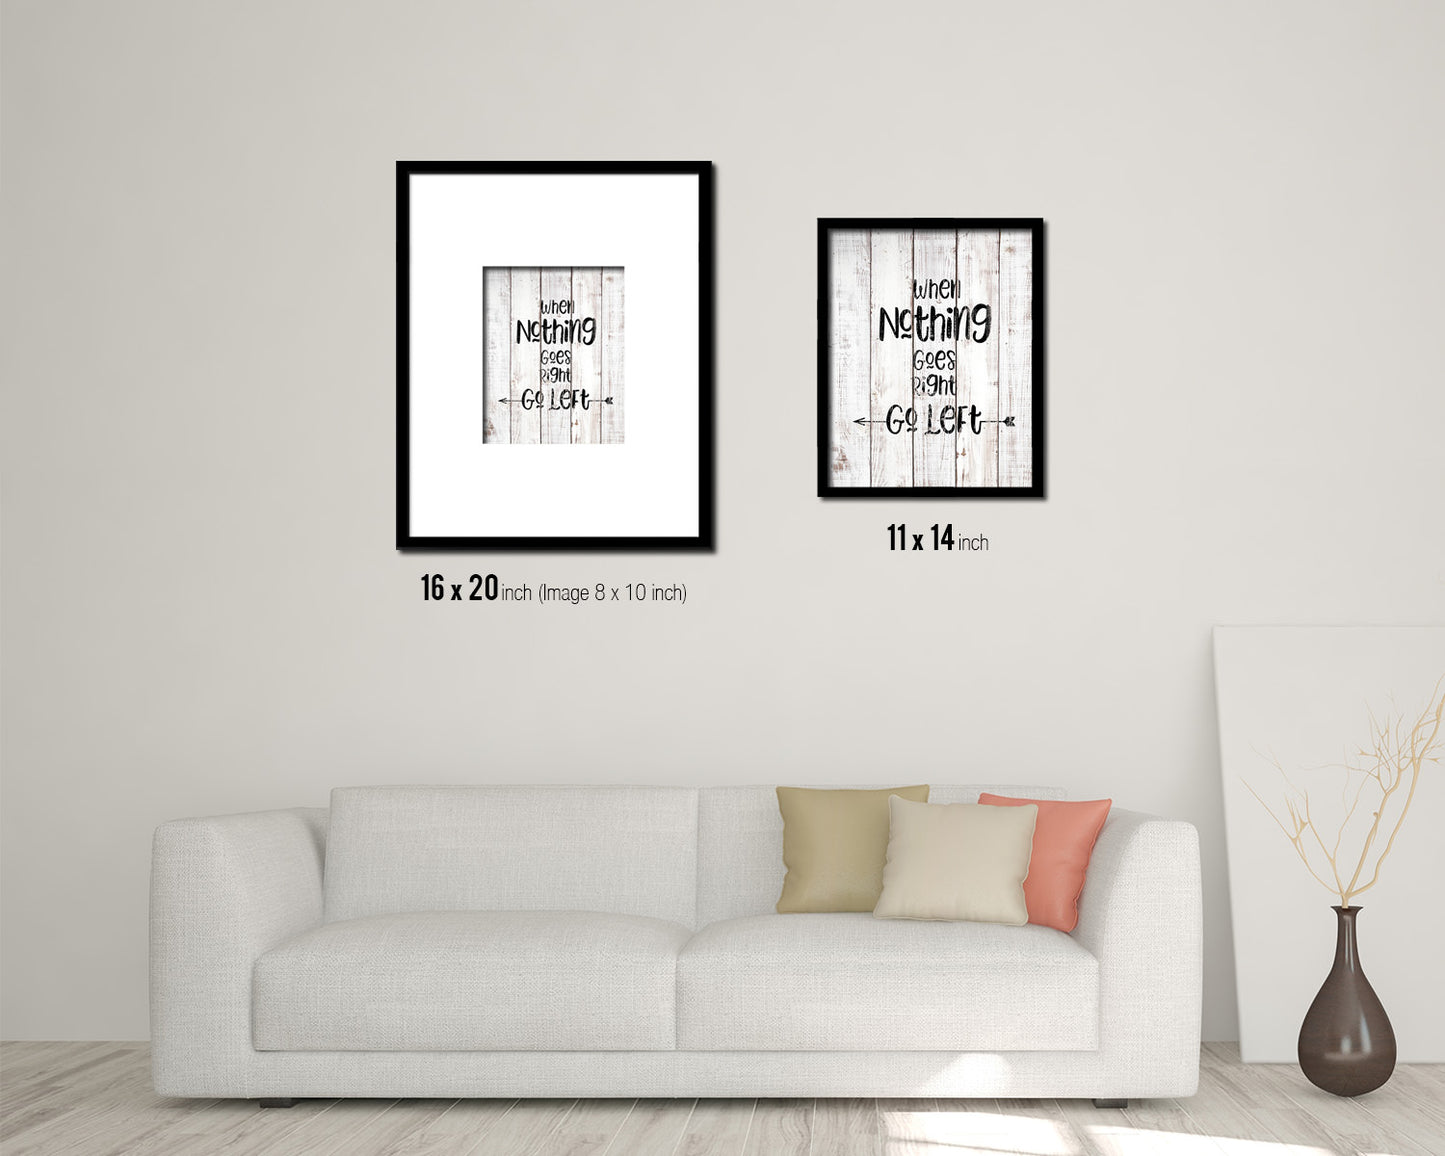 When nothing goes right go left White Wash Quote Framed Print Wall Decor Art